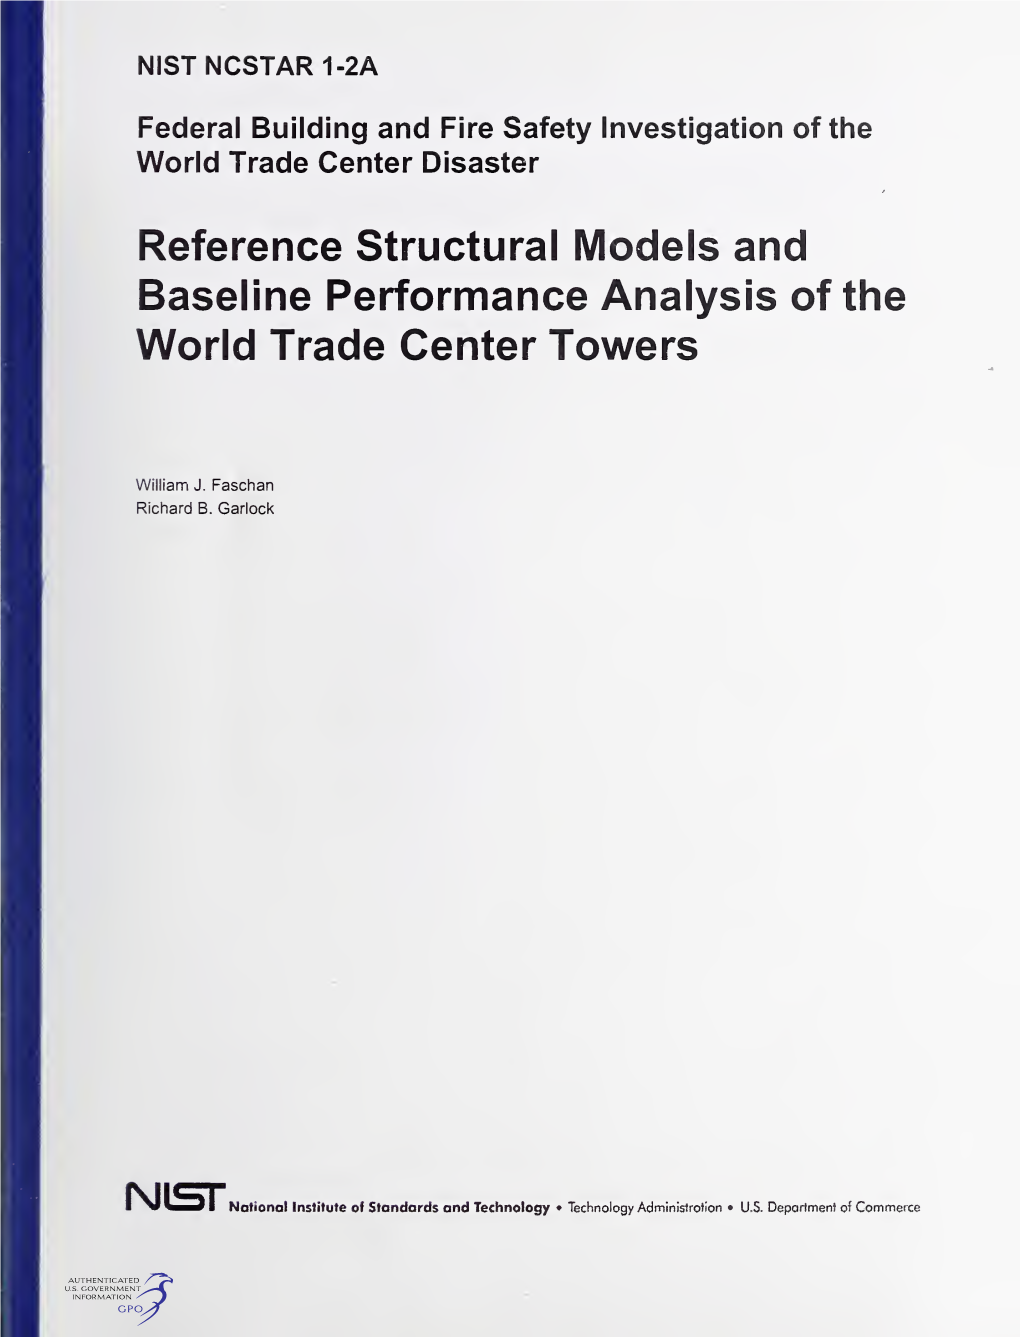 Reference Structural Models and Baseline Performance Analysis of the World Trade Center Towers